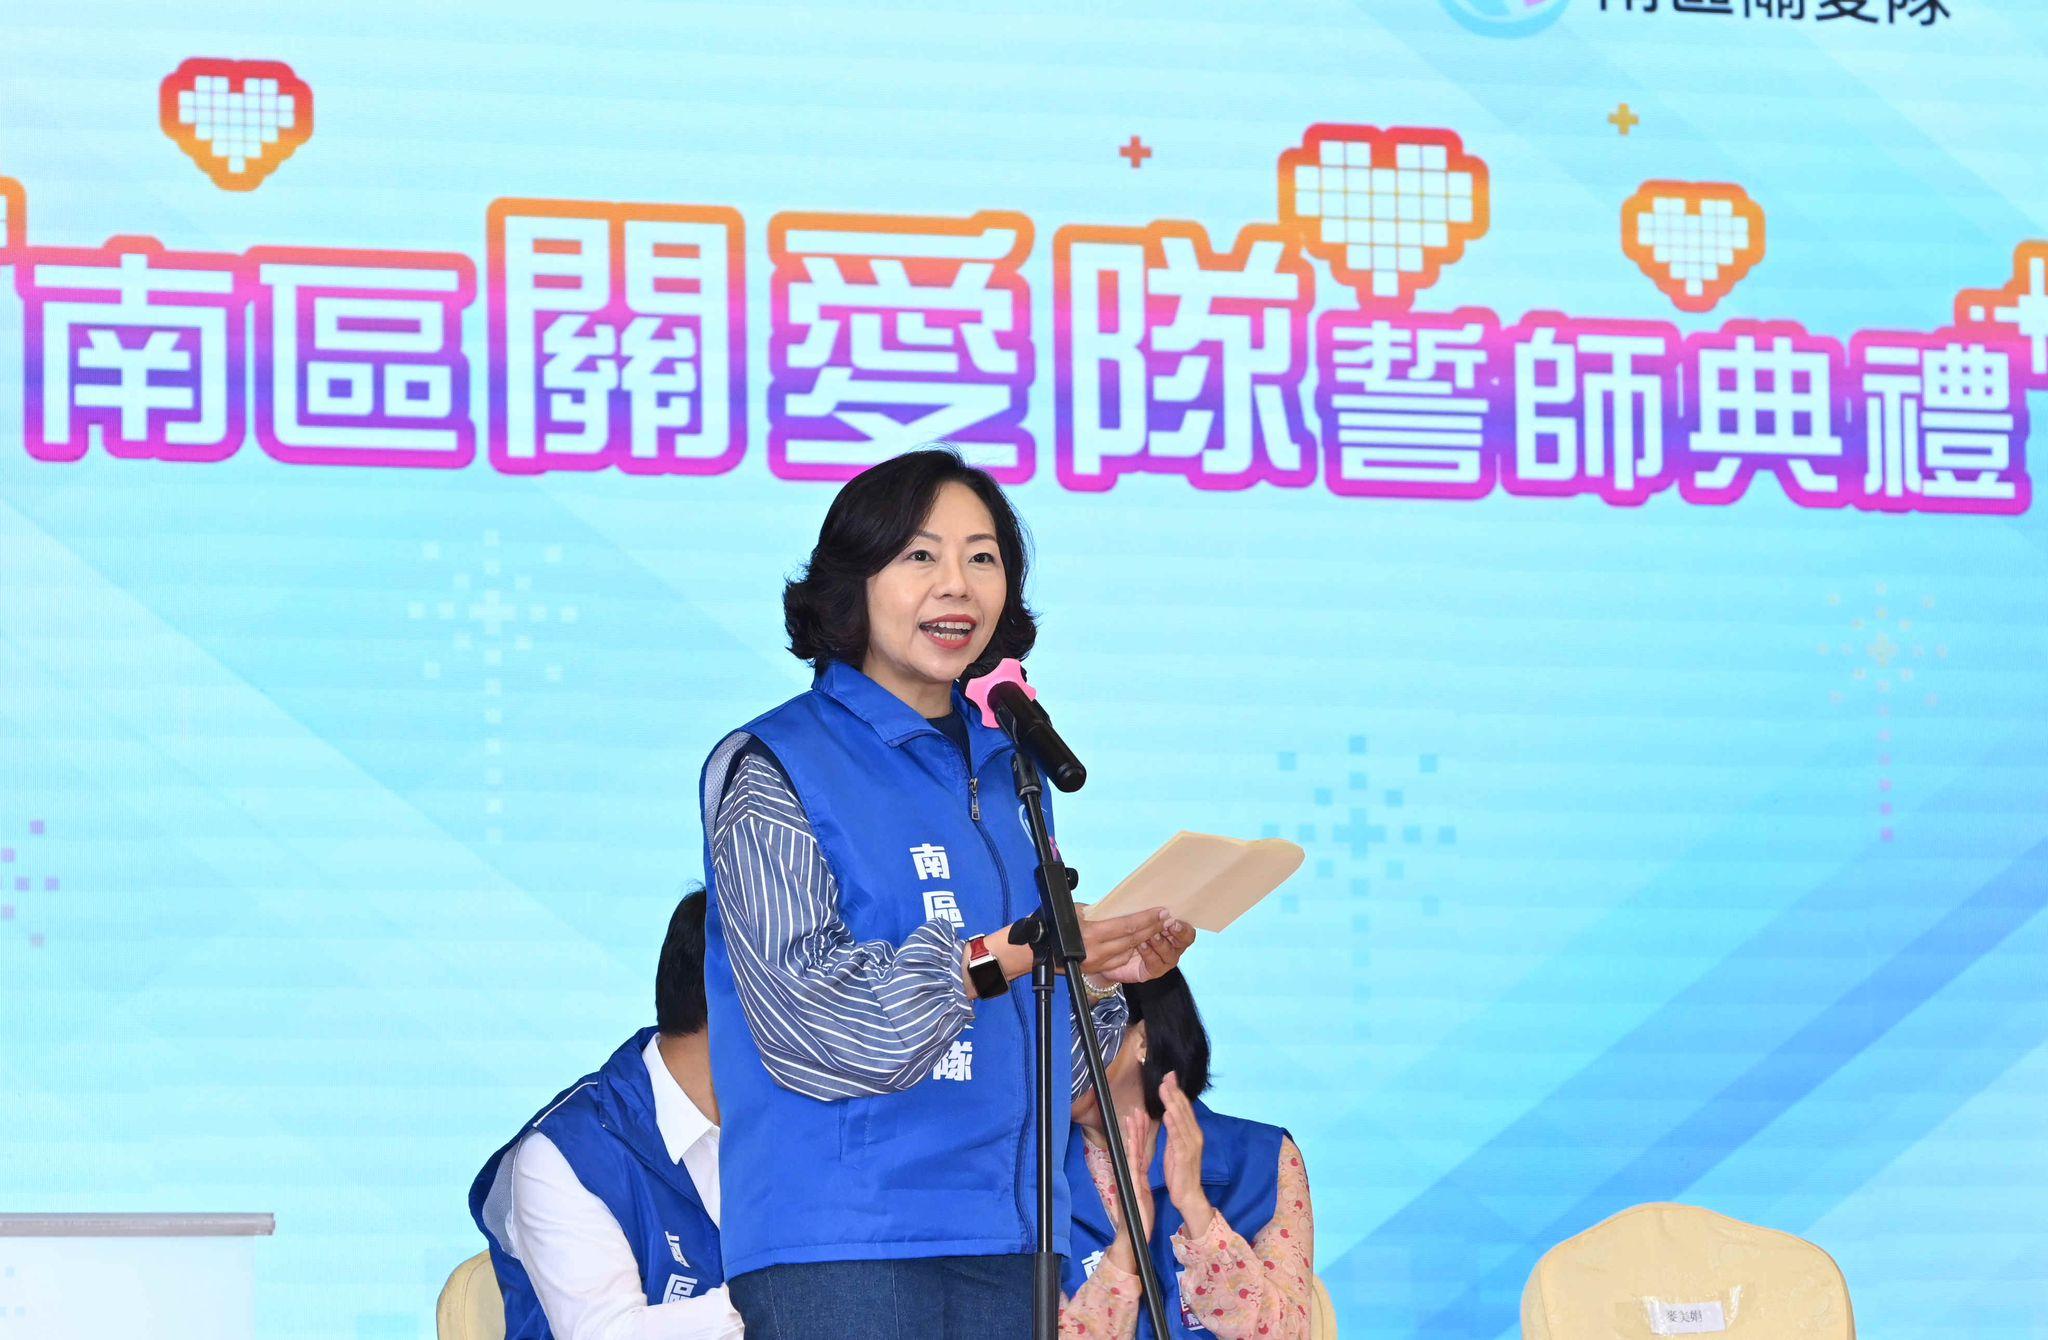 The District Services and Community Care Teams in the Southern District were officially launched today (April 30). The Chief Secretary for Administration, Mr Chan Kwok-ki, and the Secretary for Home and Youth Affairs, Miss Alice Mak, officiated at the pledging ceremony. Photo shows Miss Mak delivering a speech at the ceremony.